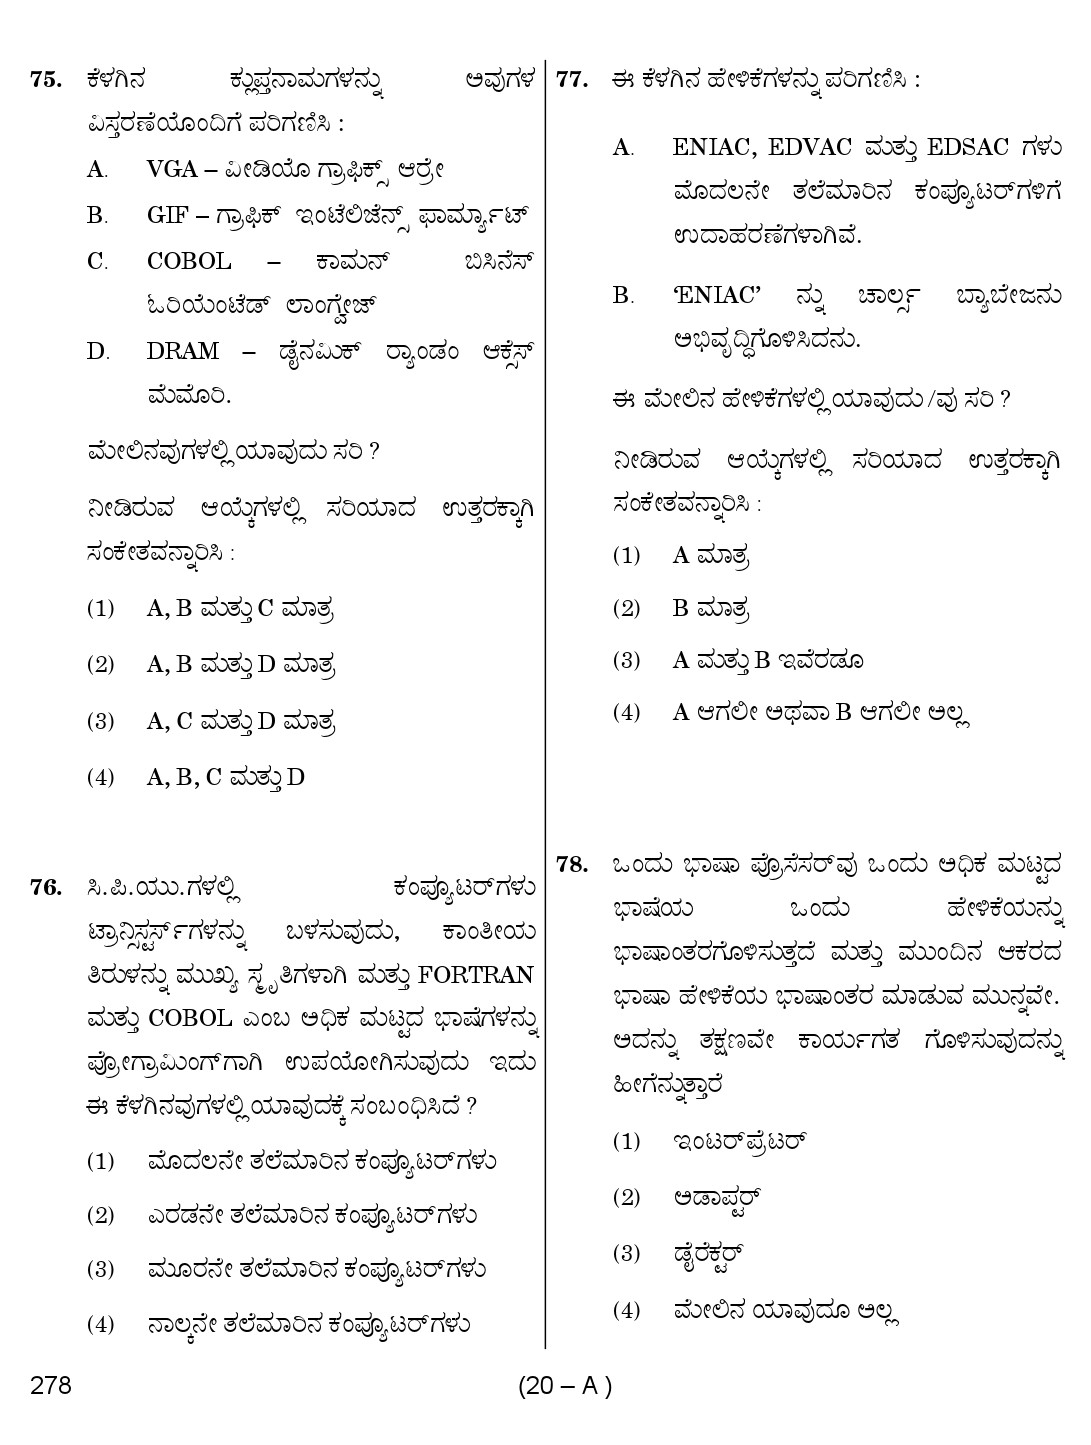 Karnataka PSC First Division Computer Assistants Exam Sample Question Paper 278 20